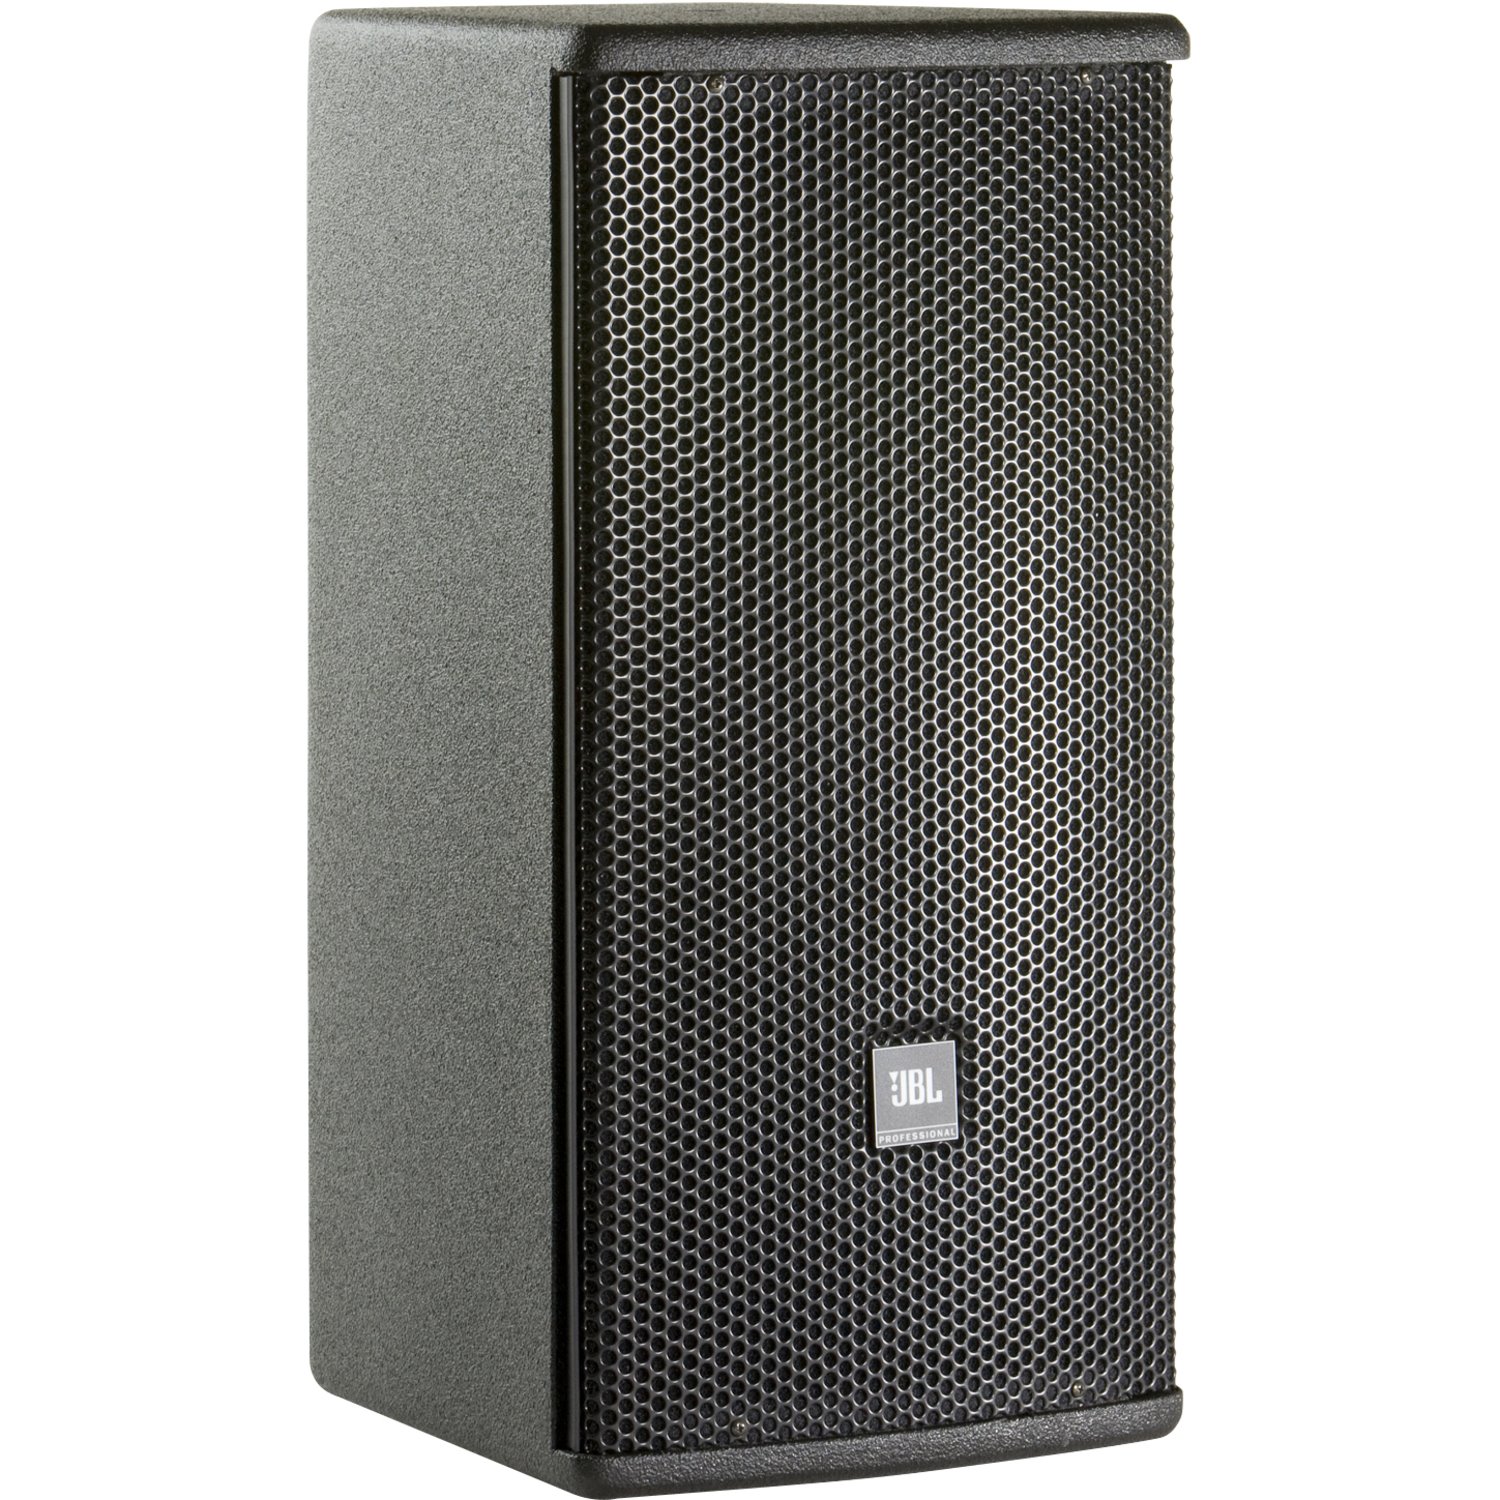 JBL Professional AC18/95 2-way Stand Mountable, Wall Mountable, Ceiling Mountable Speaker - 500 W RMS - Black